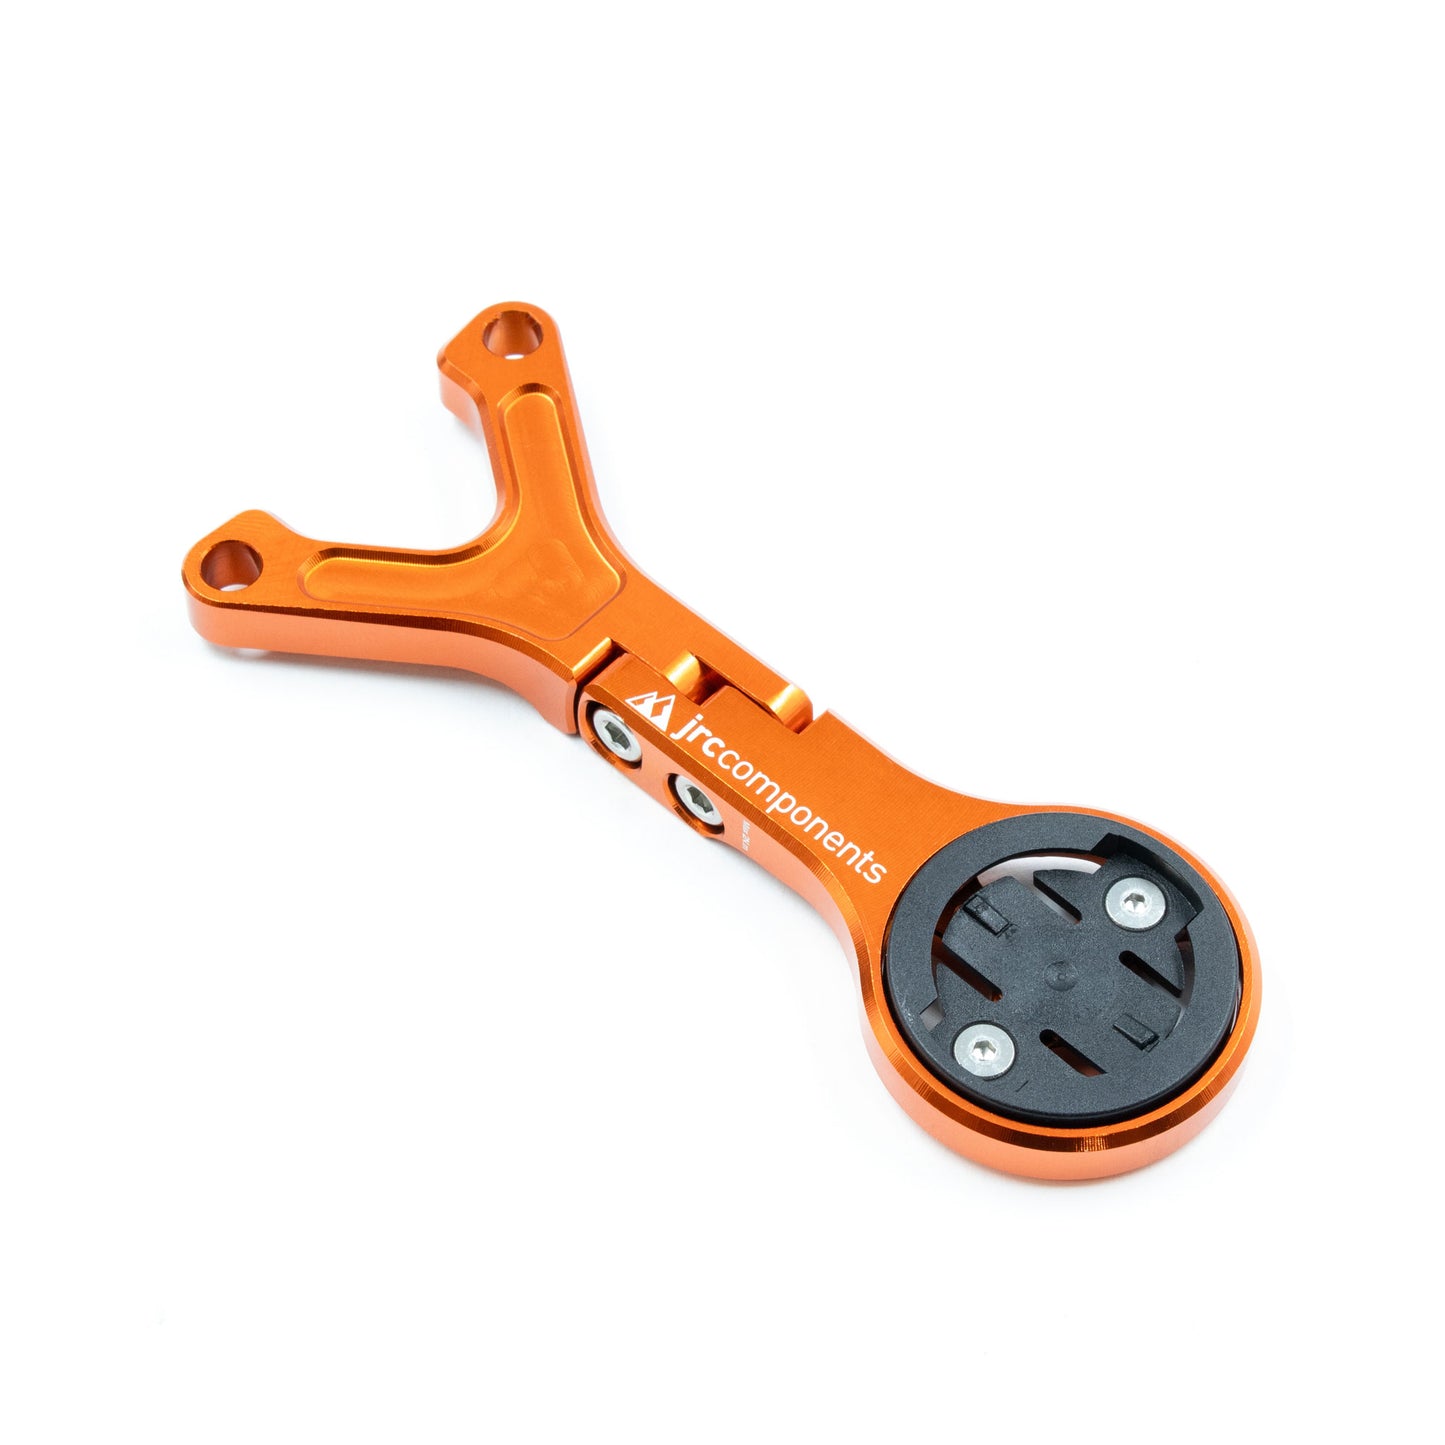 JRC Components, Lightweight Underbar Out Front Mount GPS Computer Mount for Cannondale Hollowgram Knot and Save Handlebar and Stem System for Wahoo in Orange